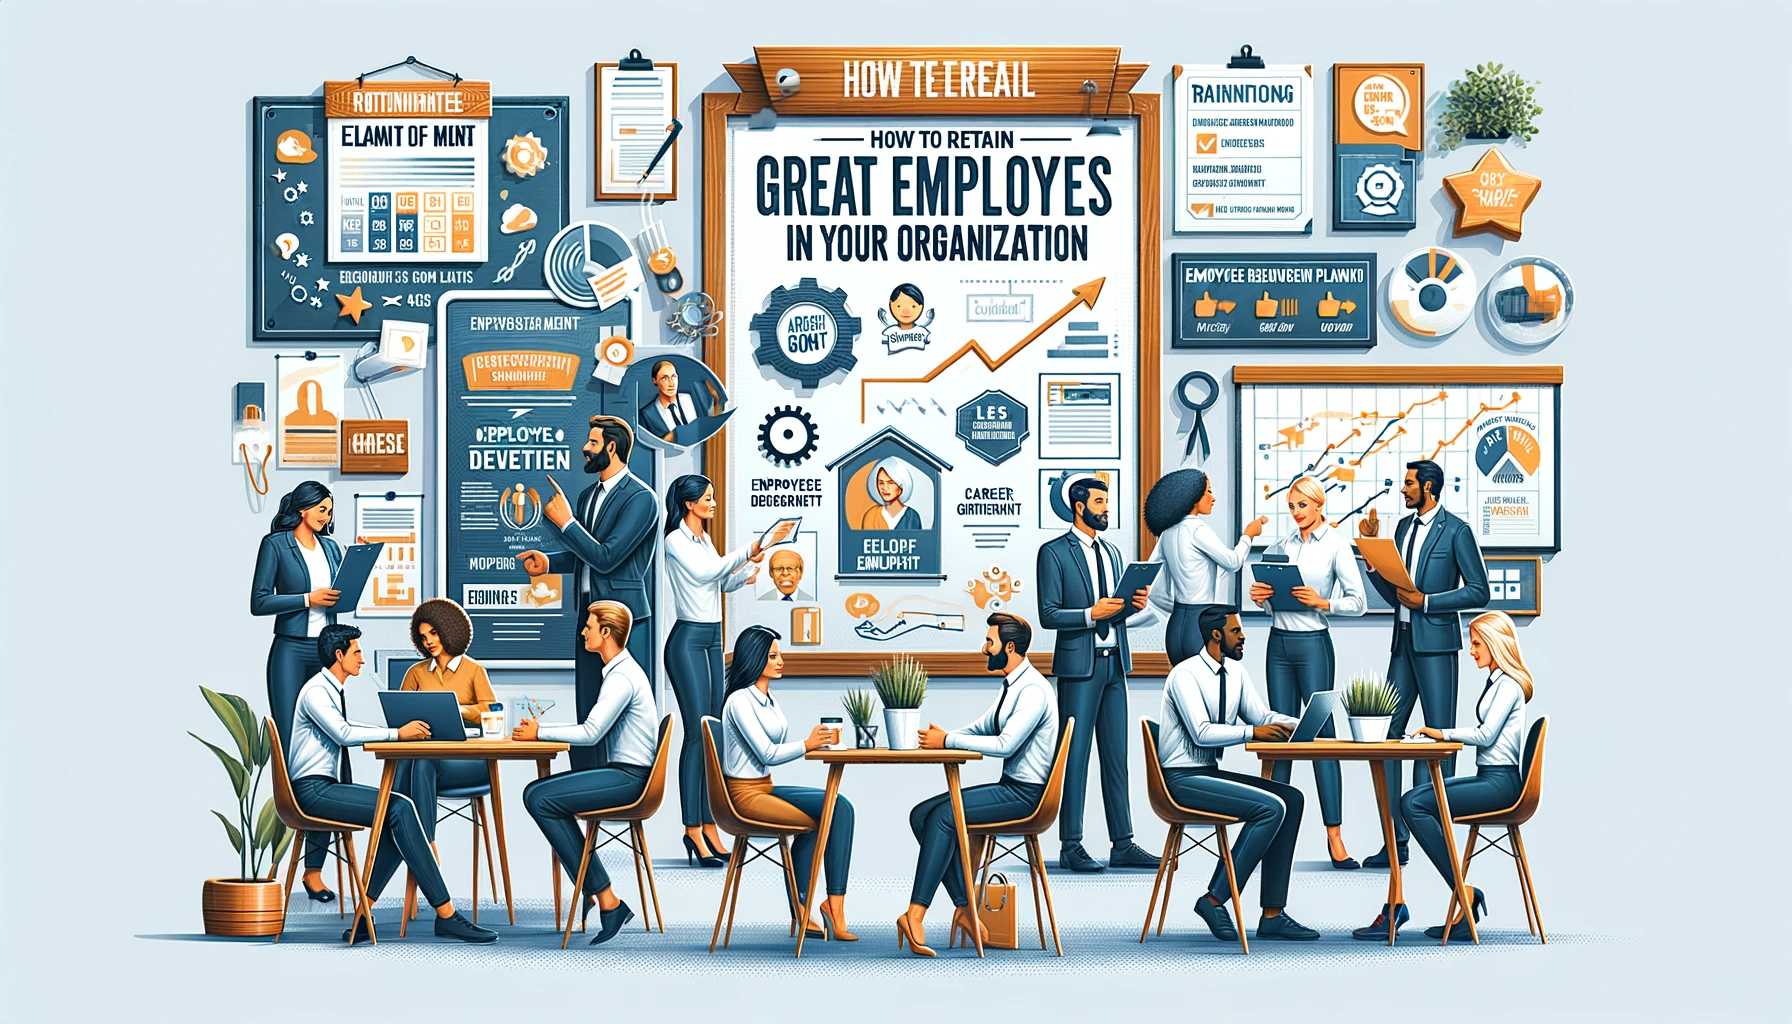 How to Retain Great Employees in Your Organization